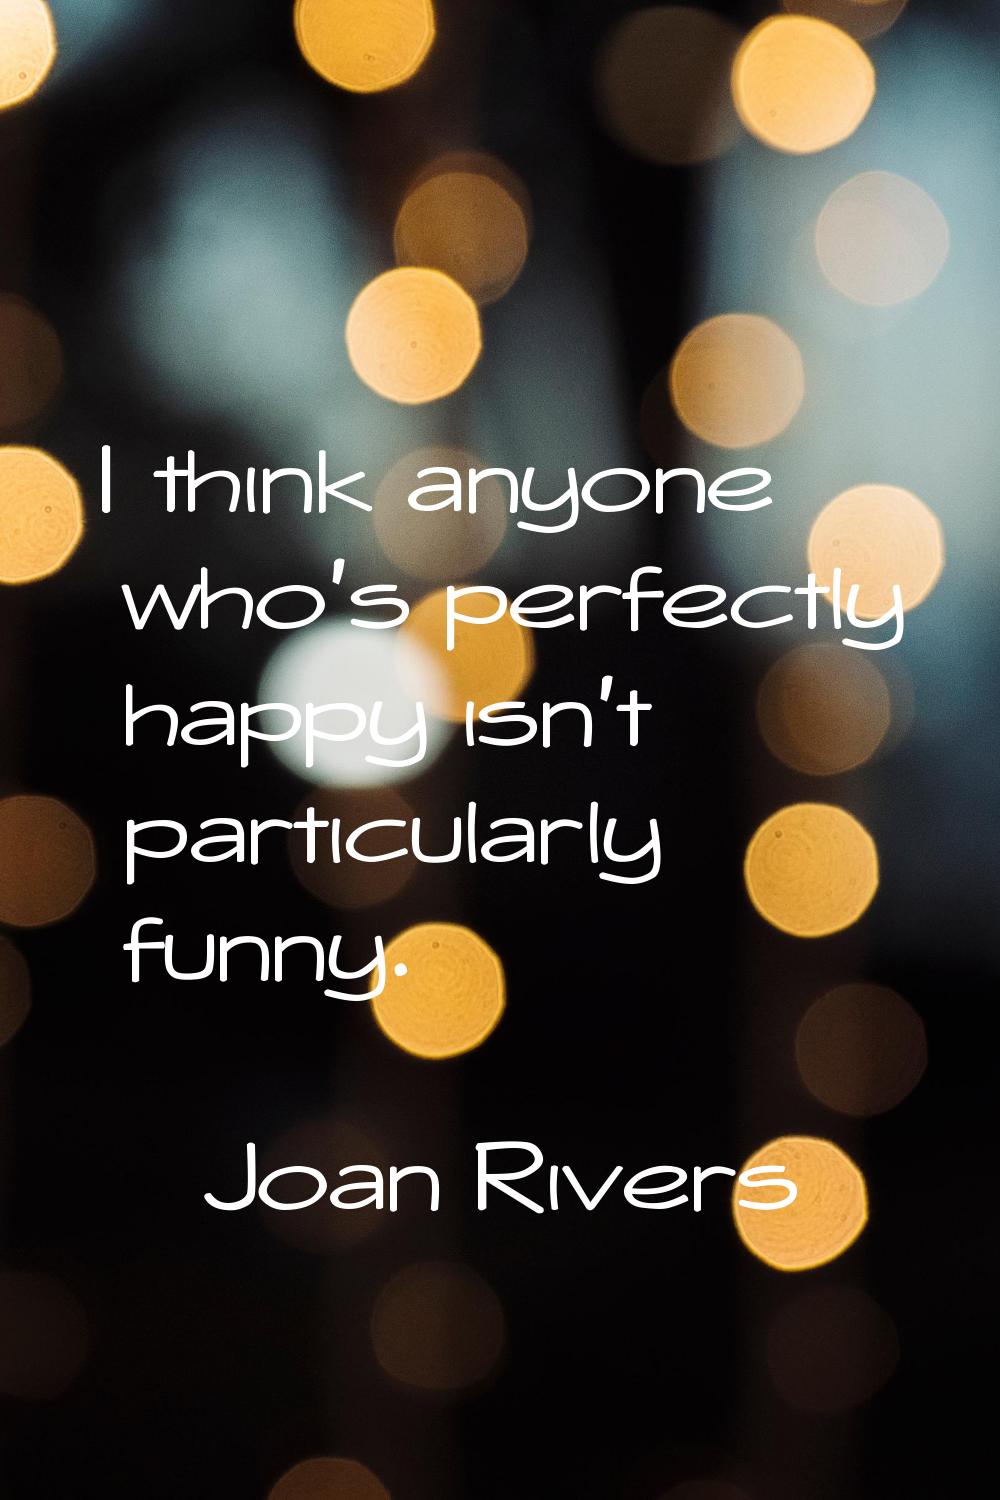 I think anyone who's perfectly happy isn't particularly funny.